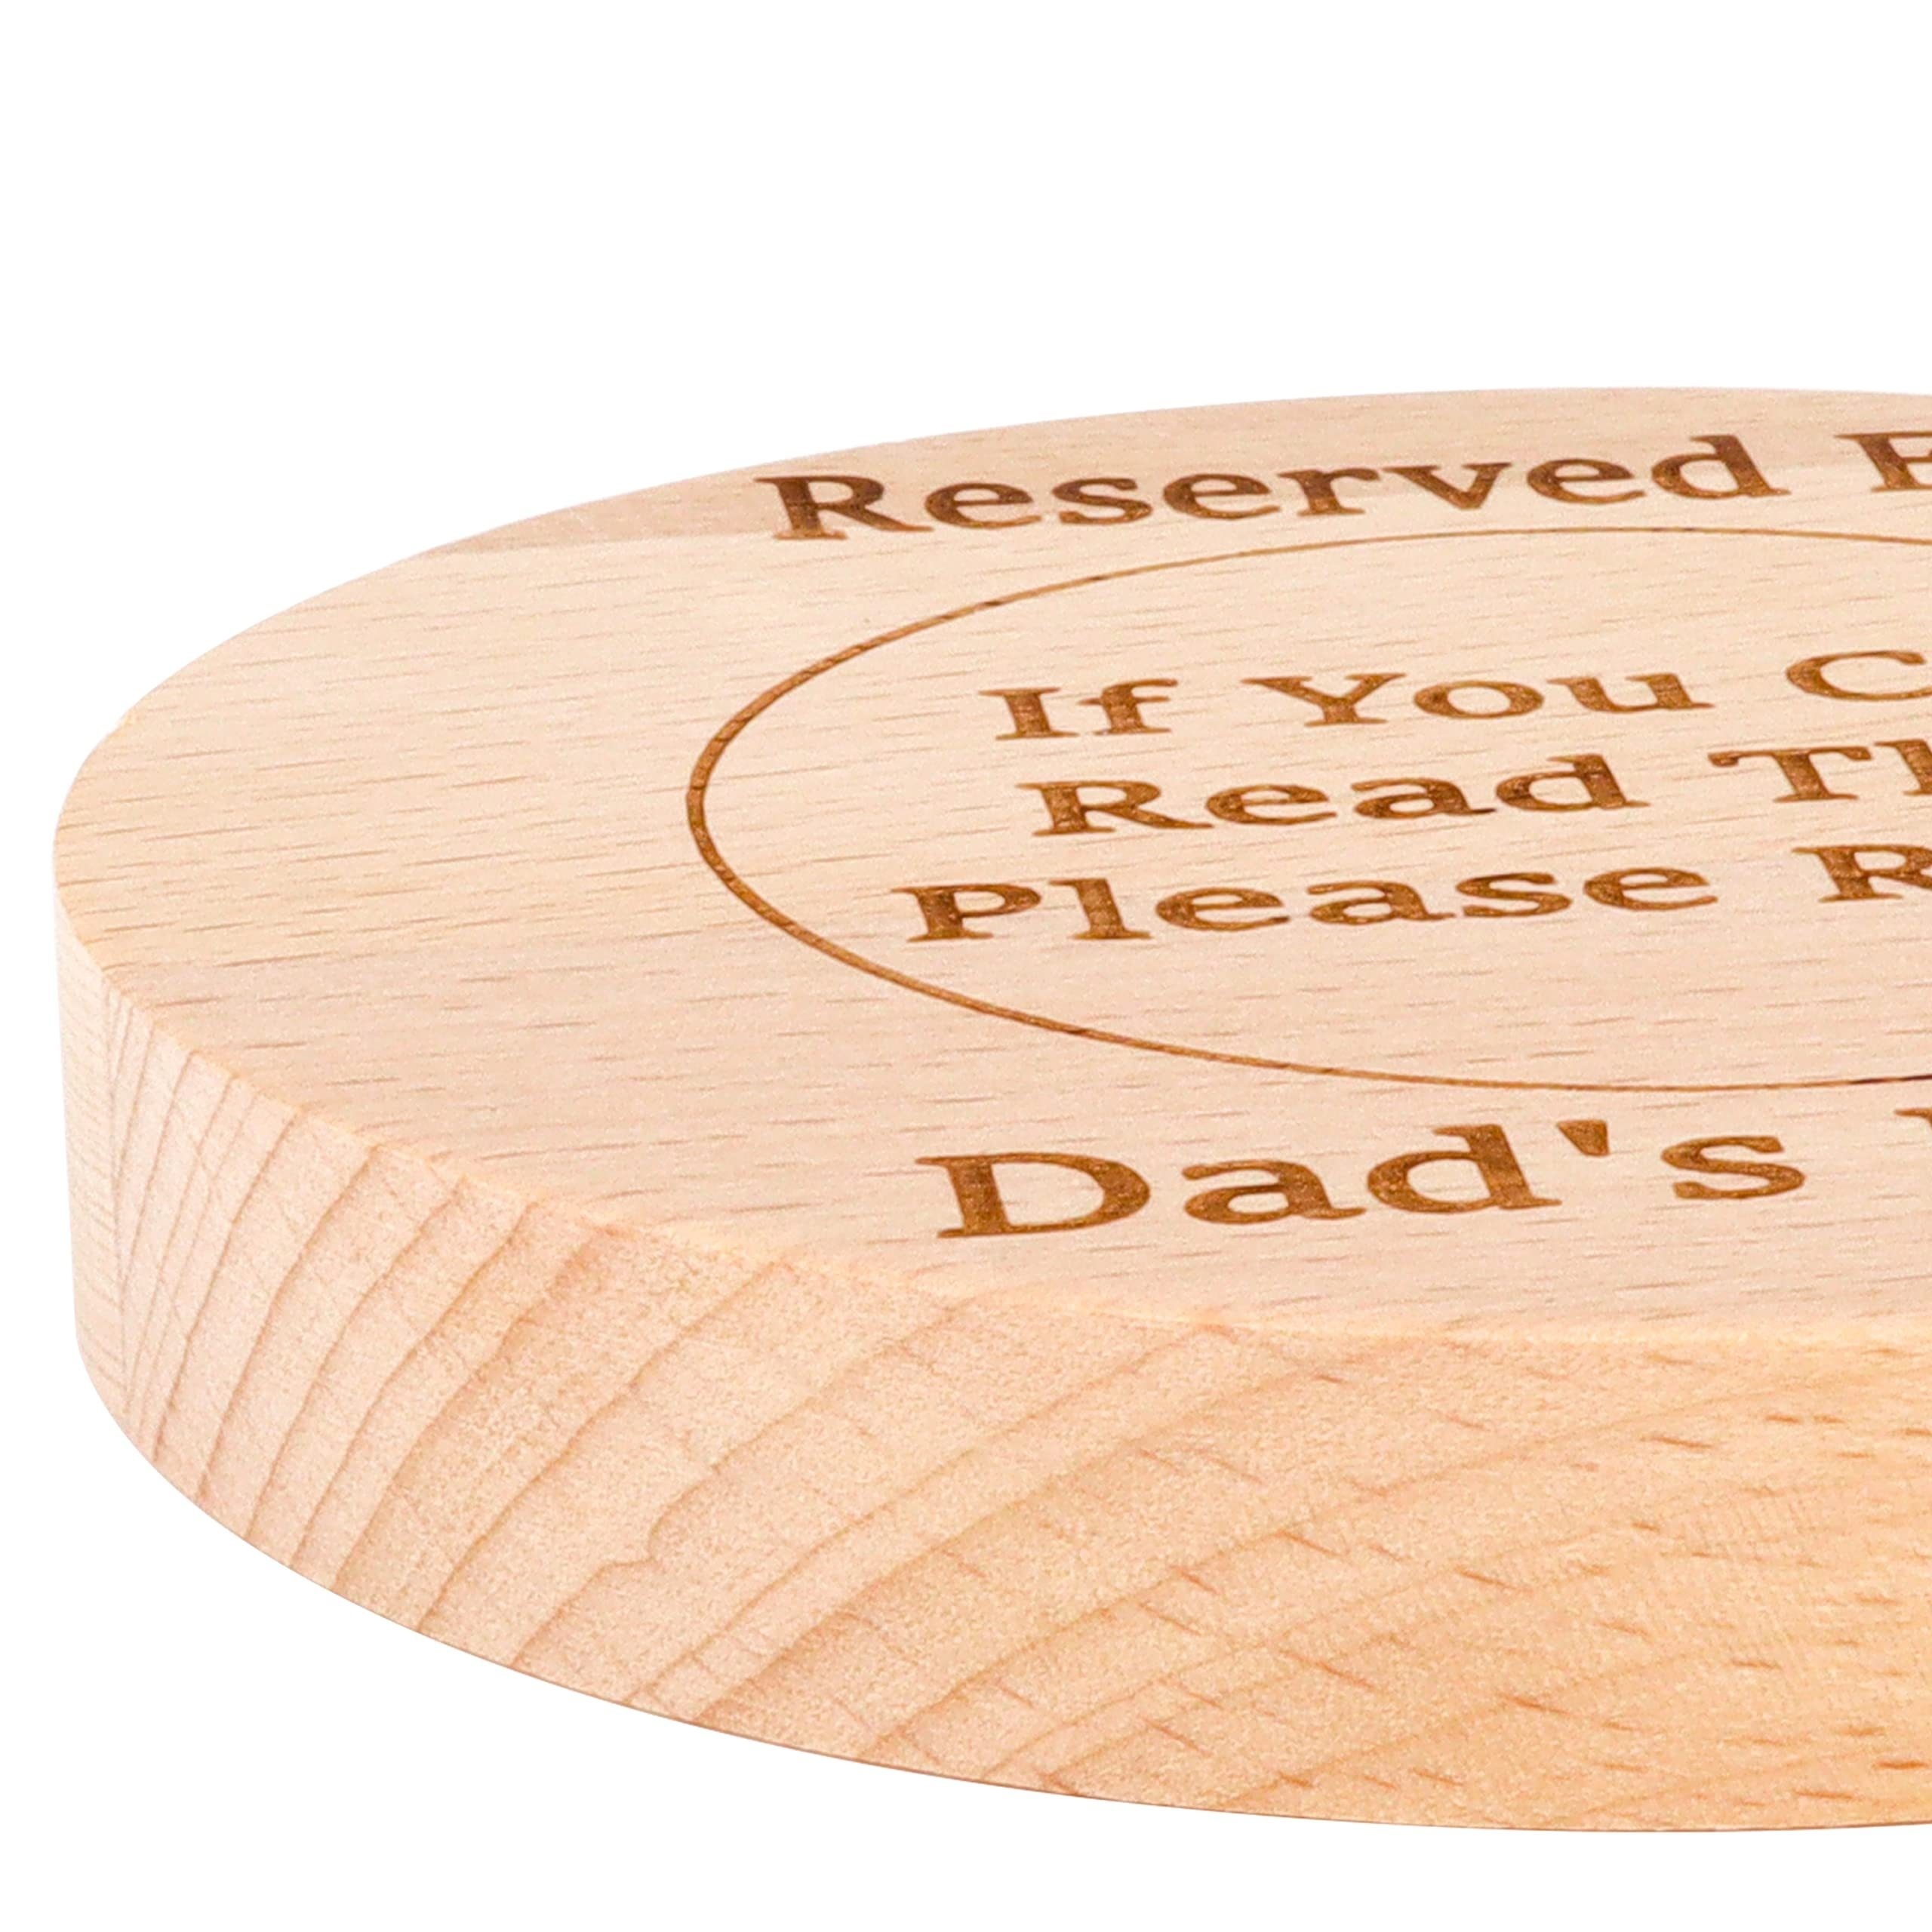 Bottle Opener for Dad, Personalised Daddy Gift, Wooden Beer Bottle Opener,  Optional Gift Box, Dad's Birthday, Fathers Day Gift 